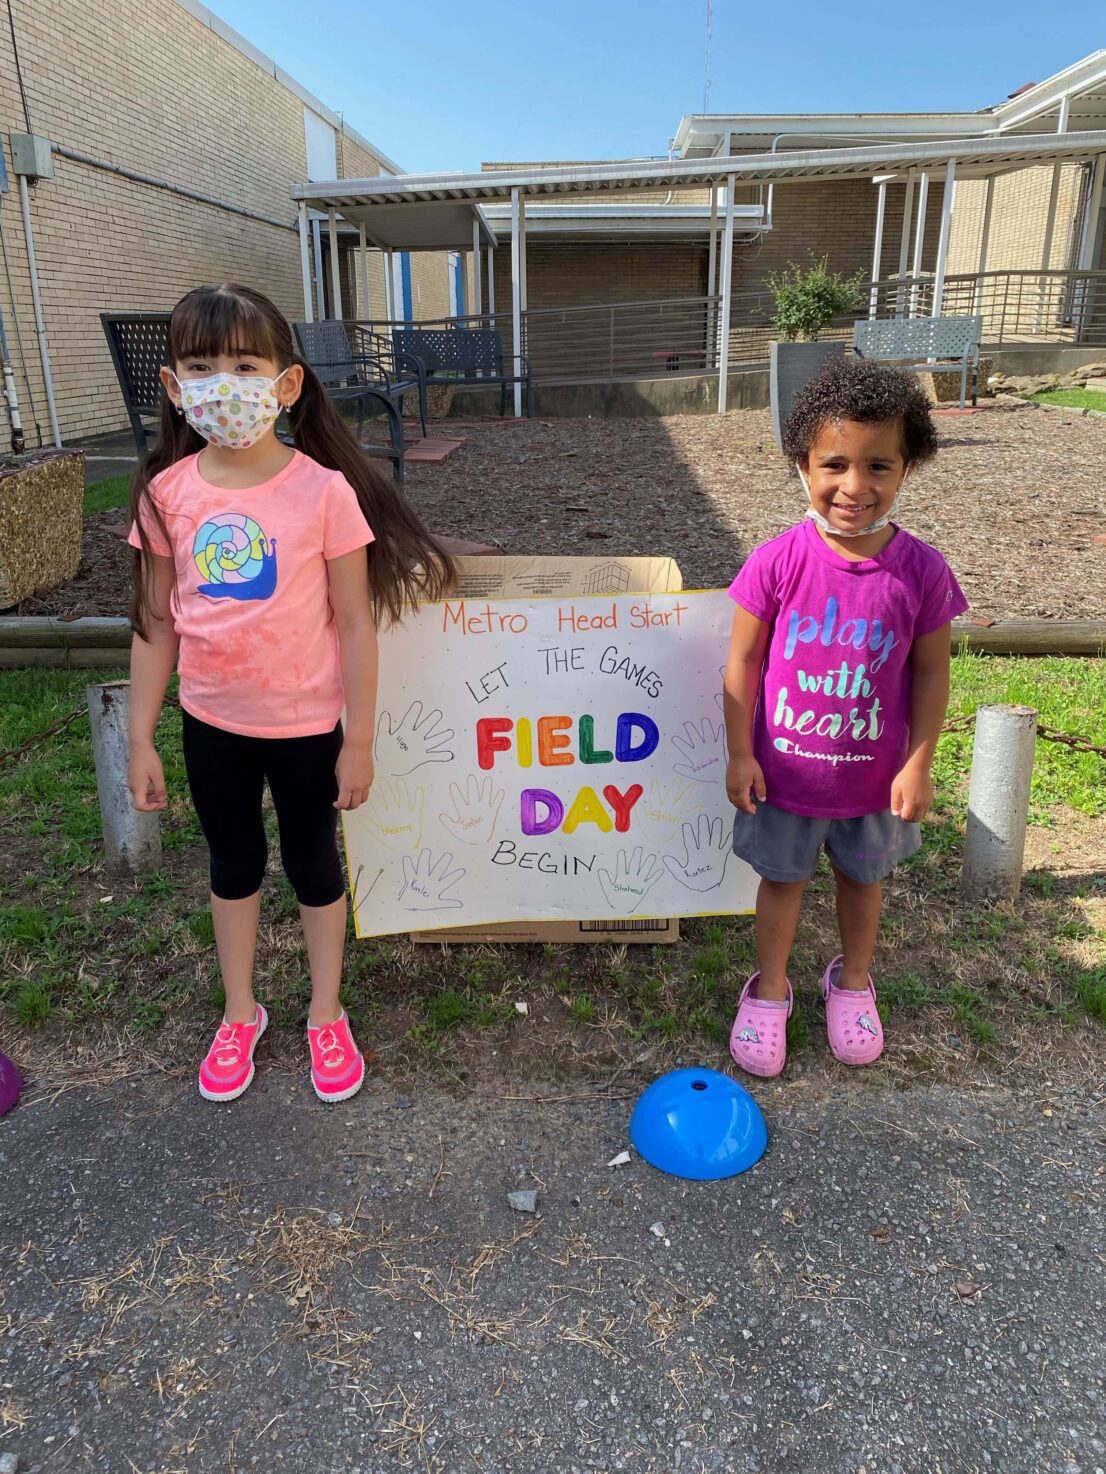 To children standing on either side of a hand-made sign that says Field Day